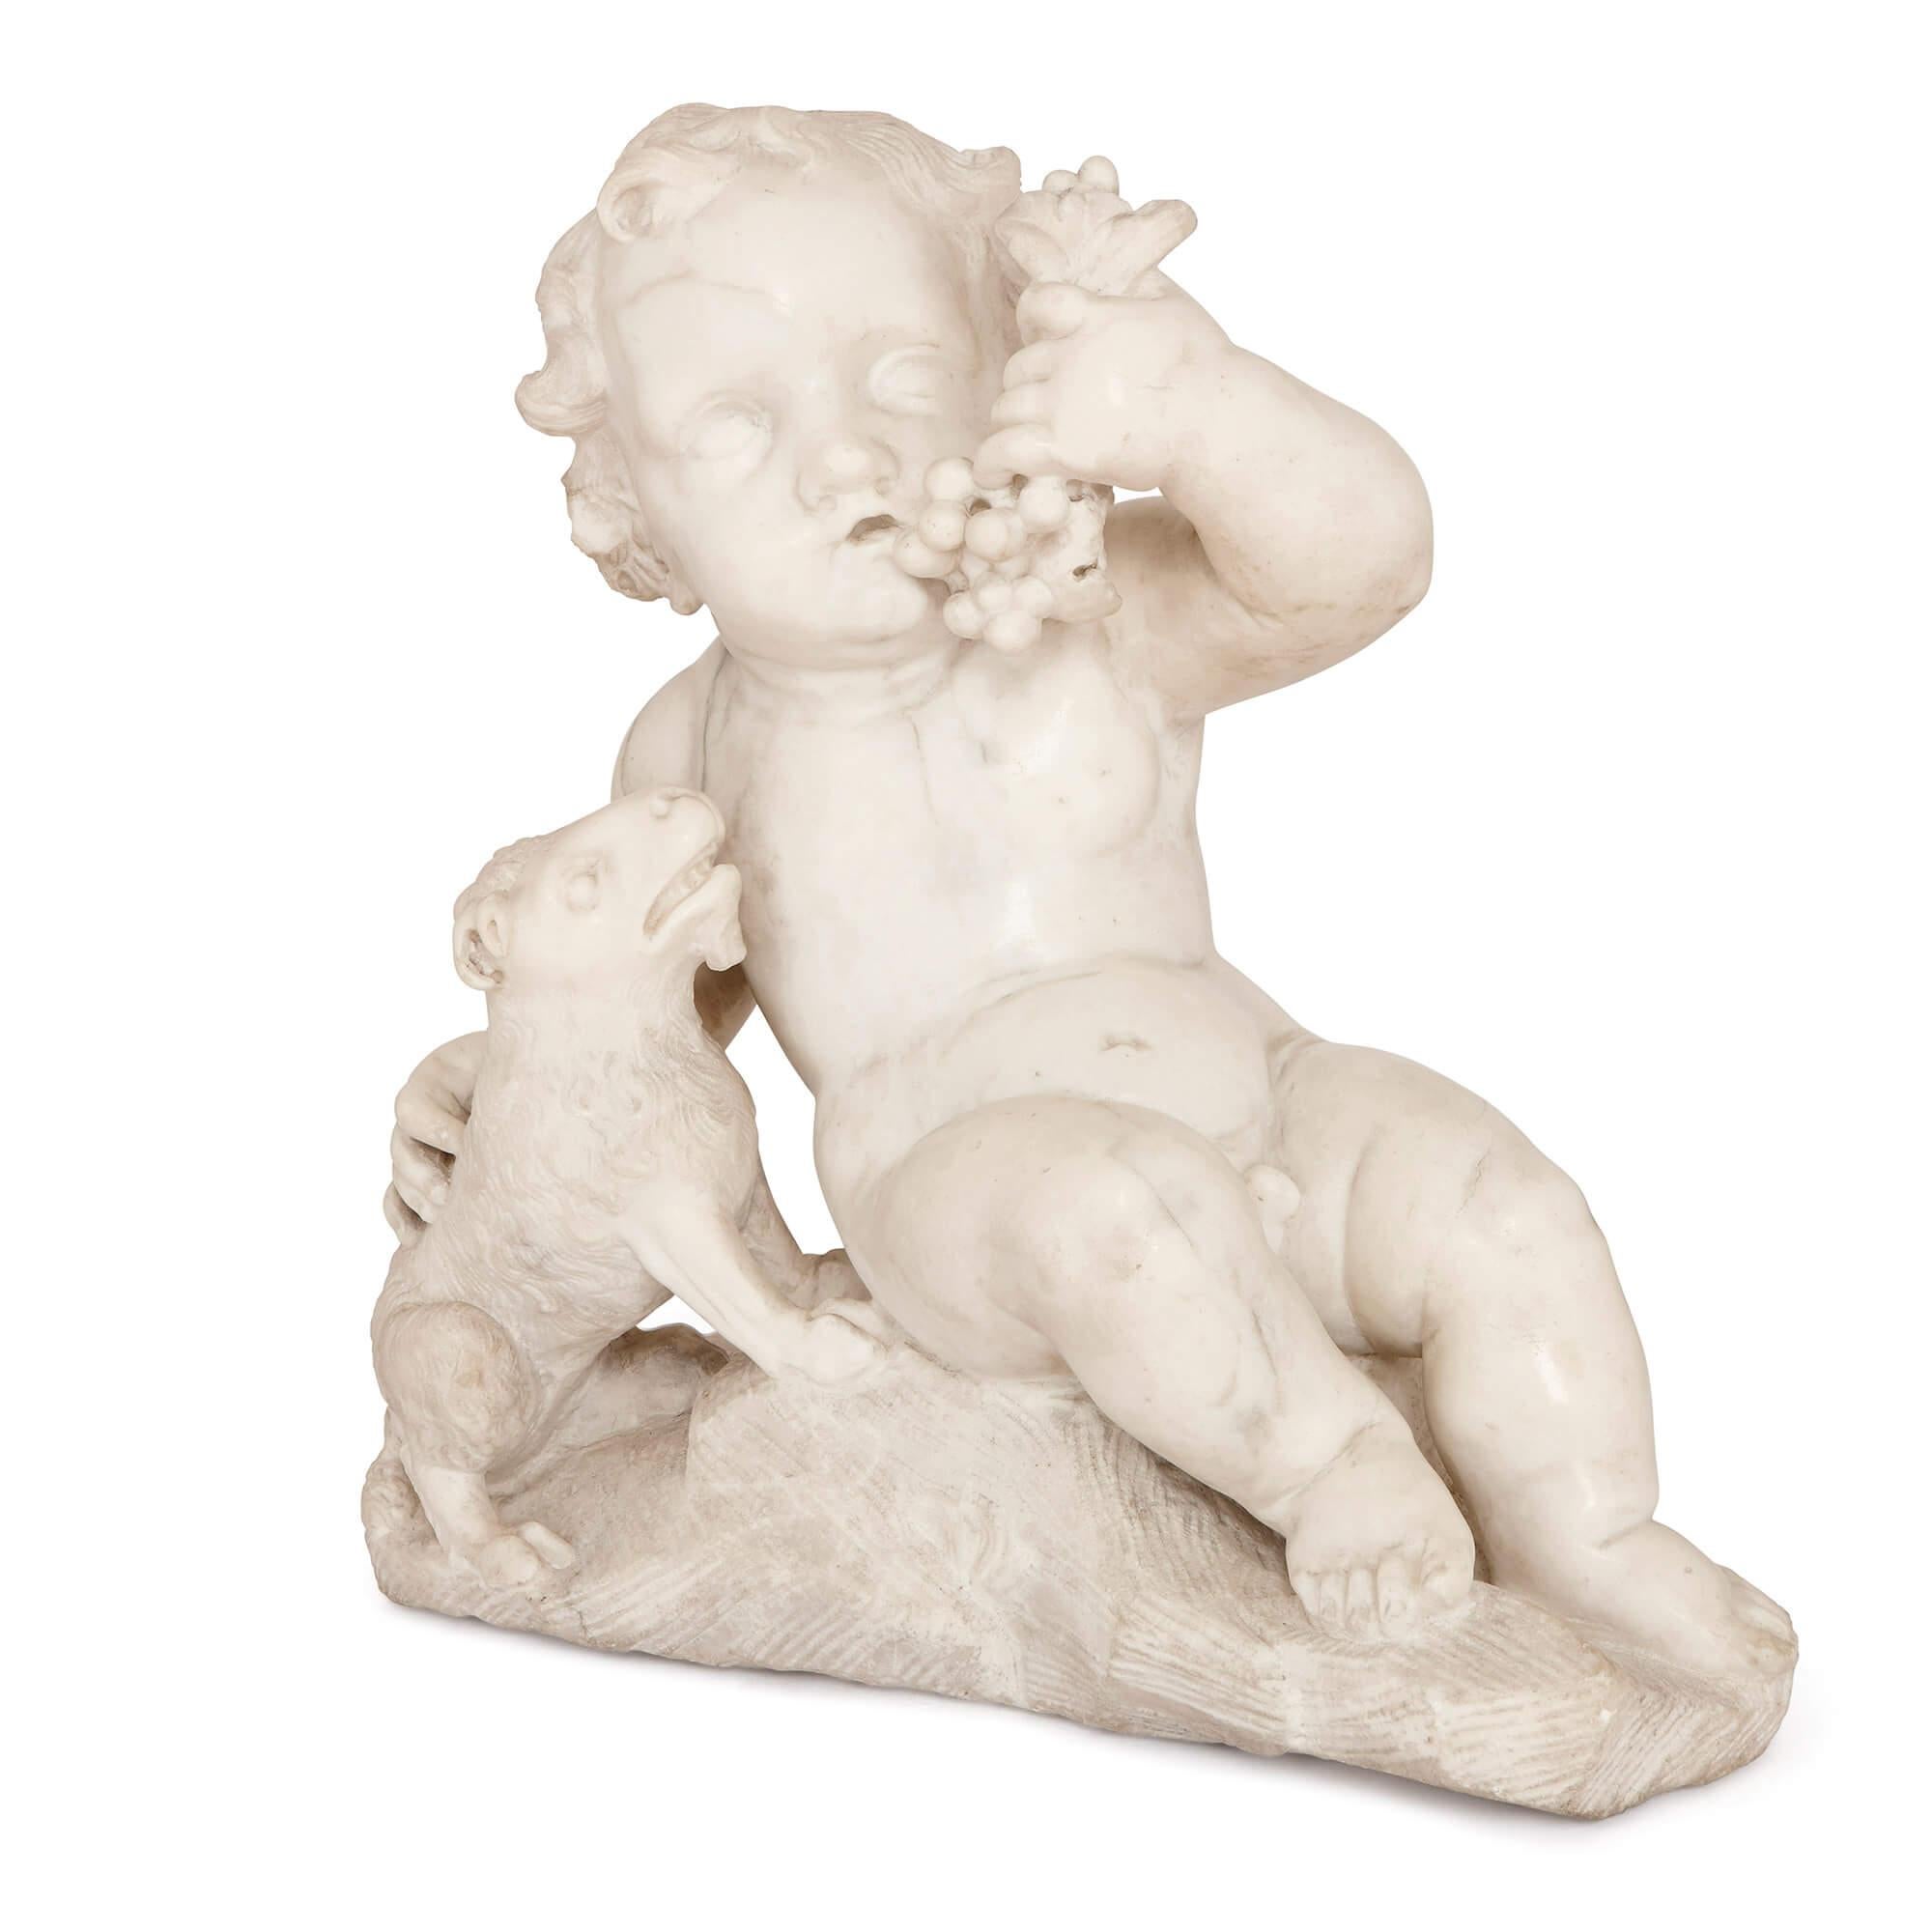 These beautiful antique marble figures are truly timeless works of sculpture, though they are almost 300 years old, they will still make joyous additions to a classical or antiques,inspired interior. The figures depict reclining putti with dogs, and